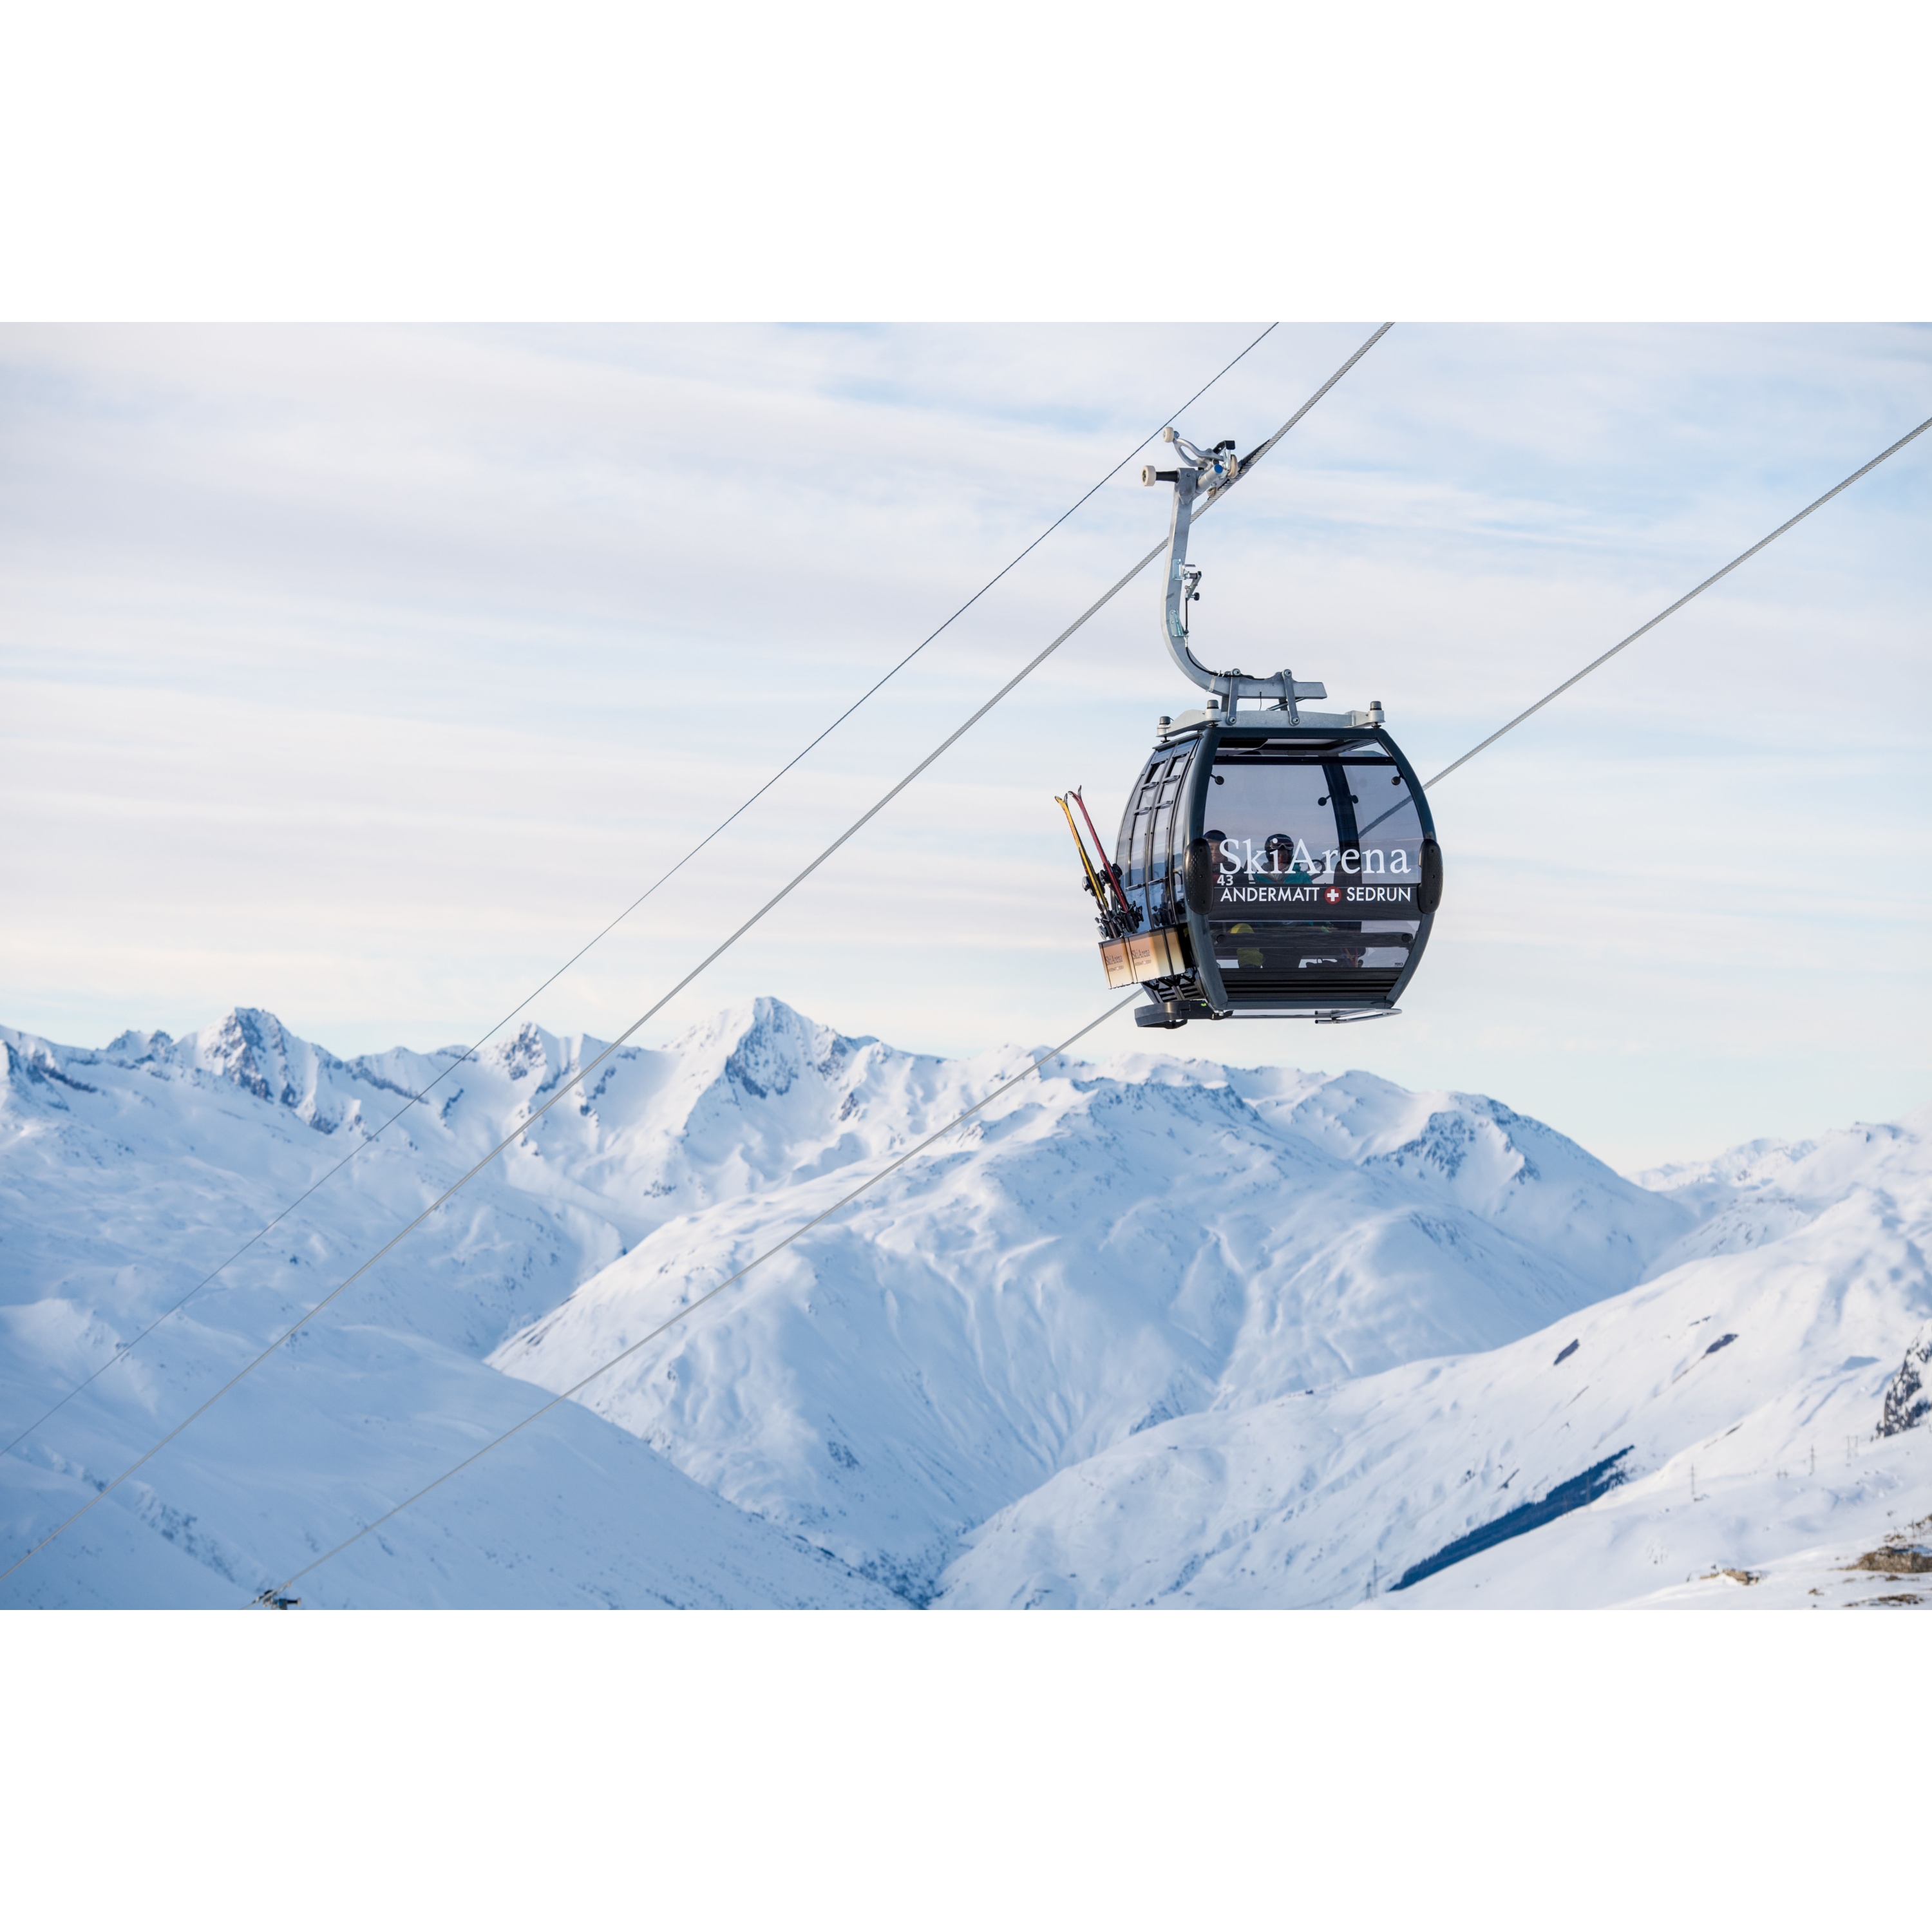 Gondola during the ascent in the Swiss Alps in winter.